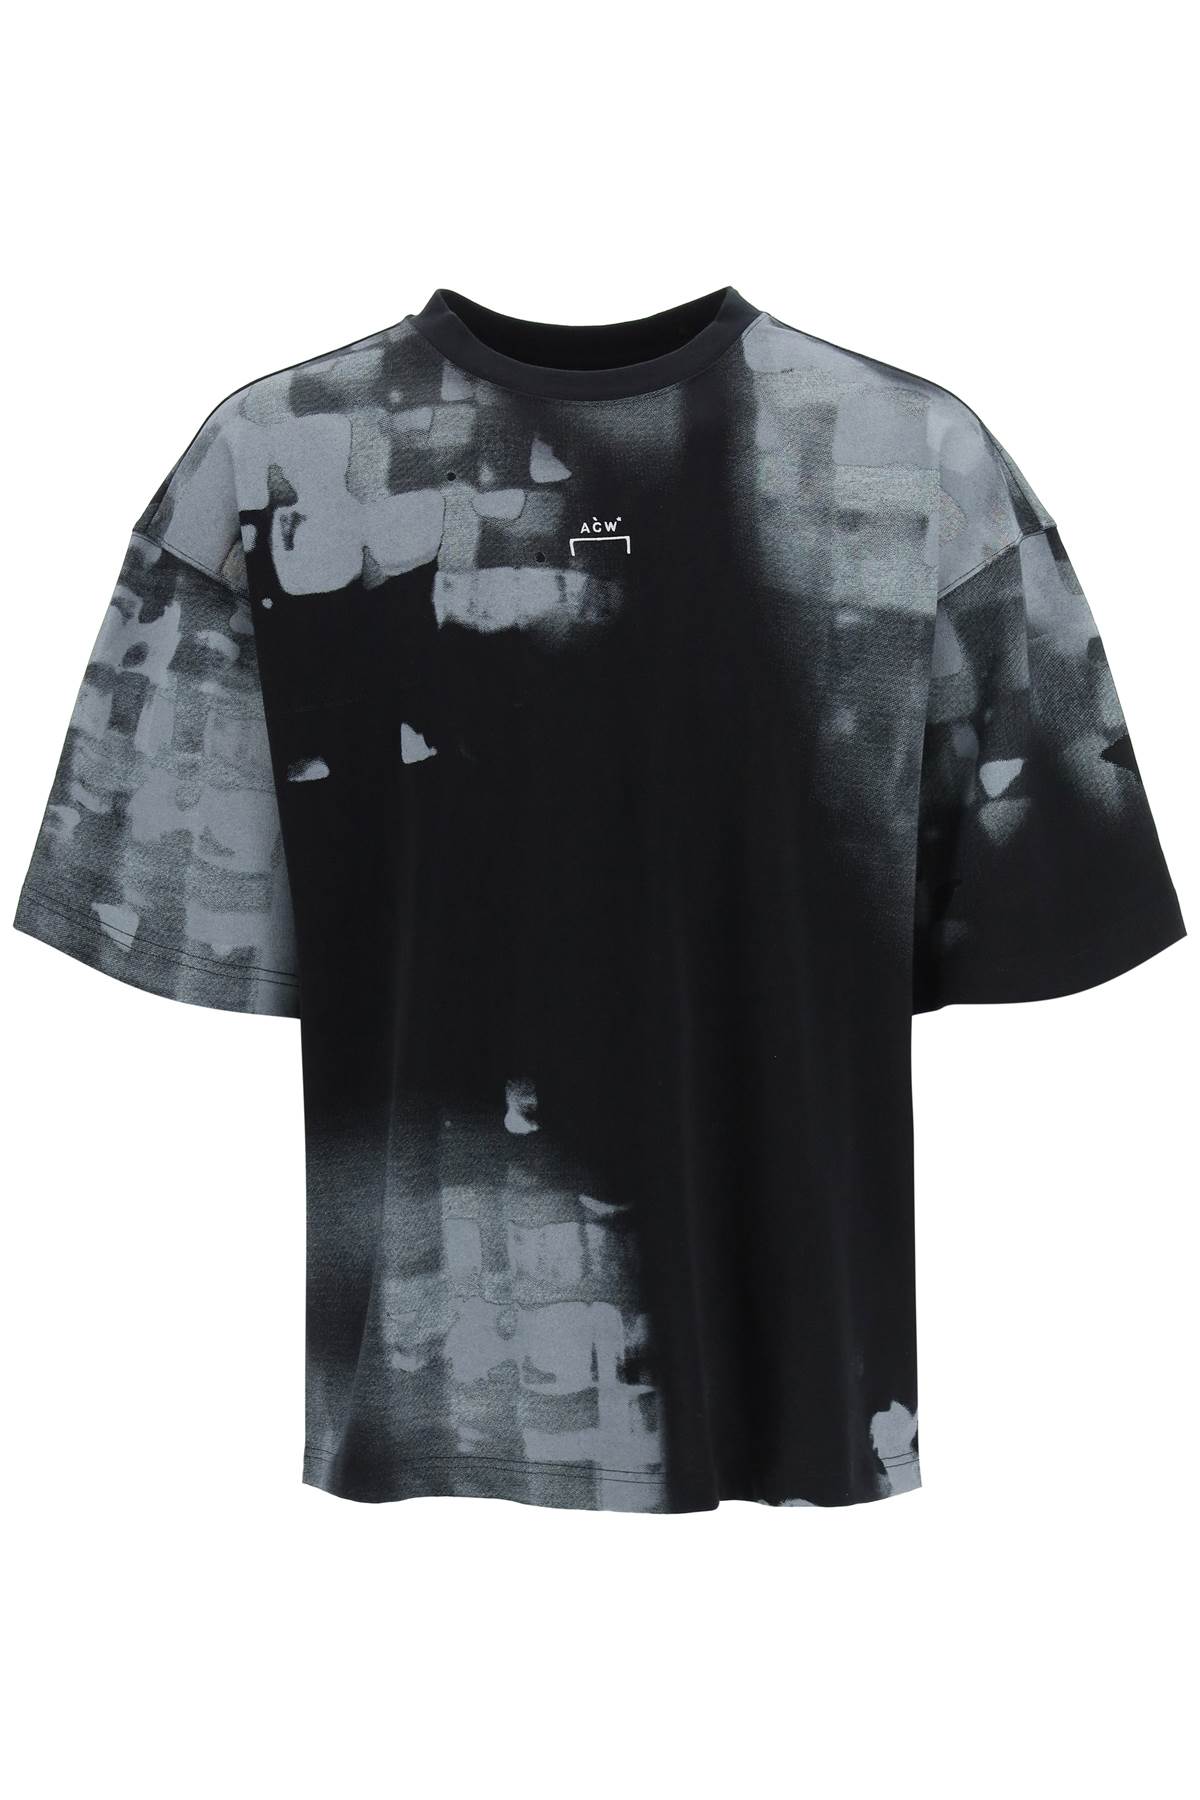 A-COLD-WALL Oversized T-shirt